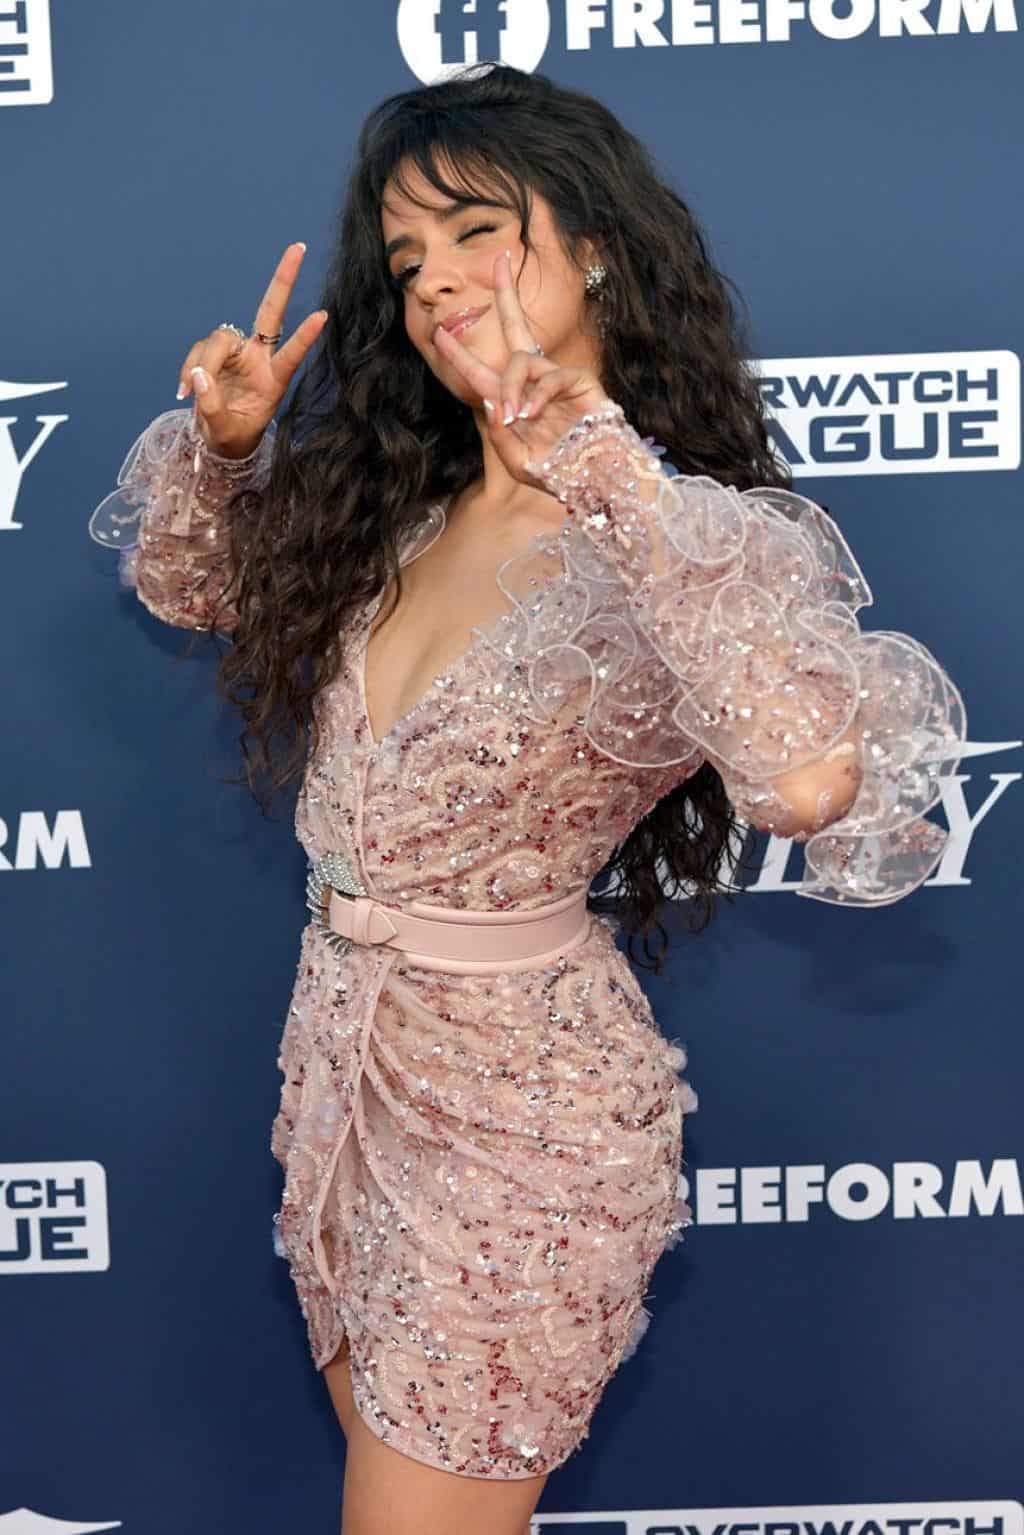 Camila Cabello Shines at Variety's Power of Young Hollywood Event